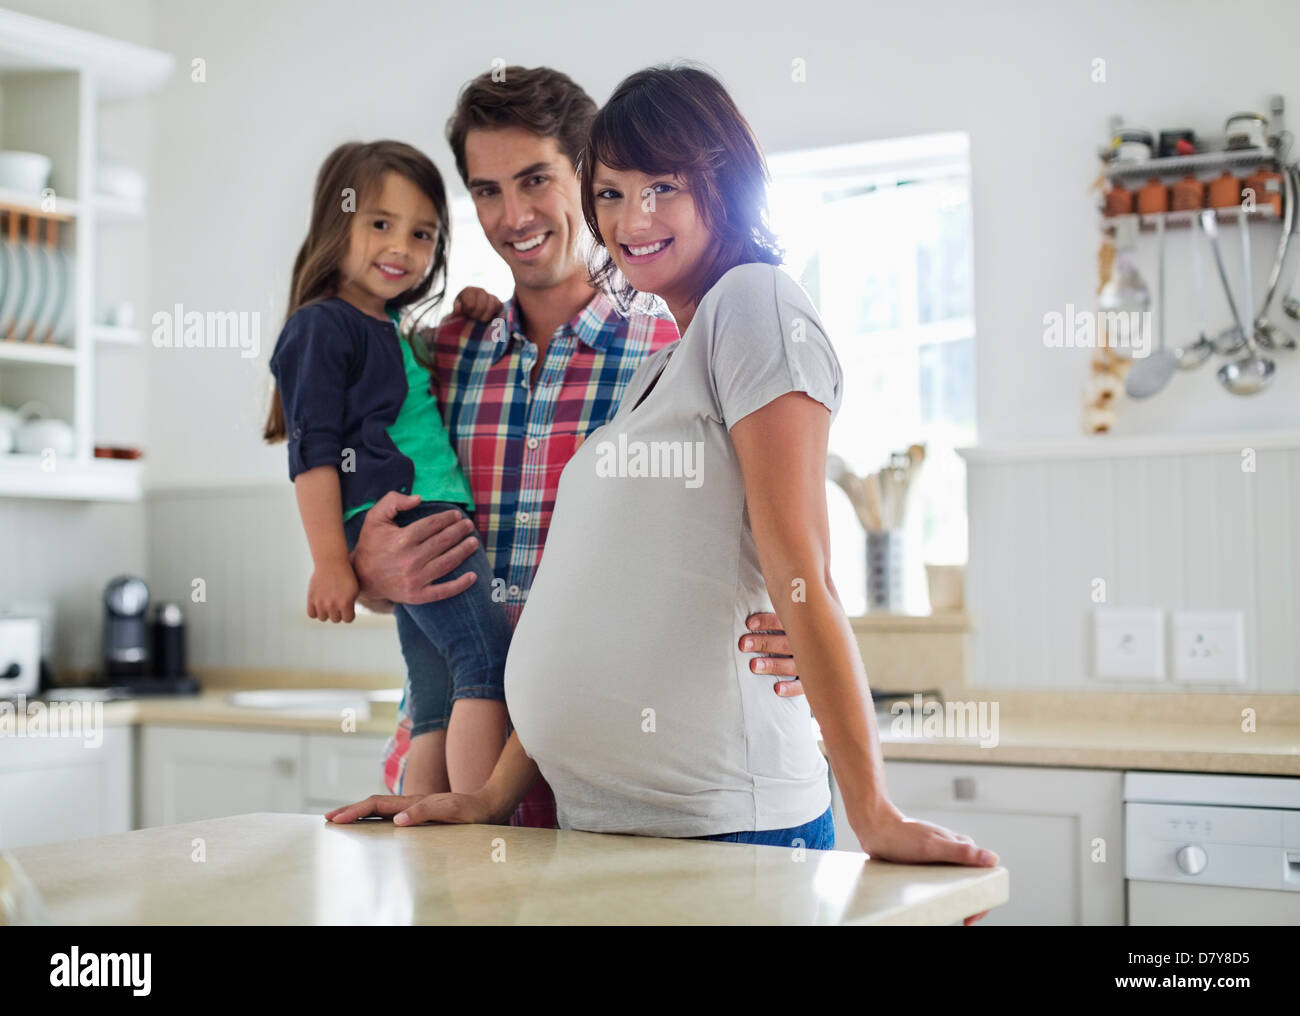 Family smiling together in kitchen Banque D'Images